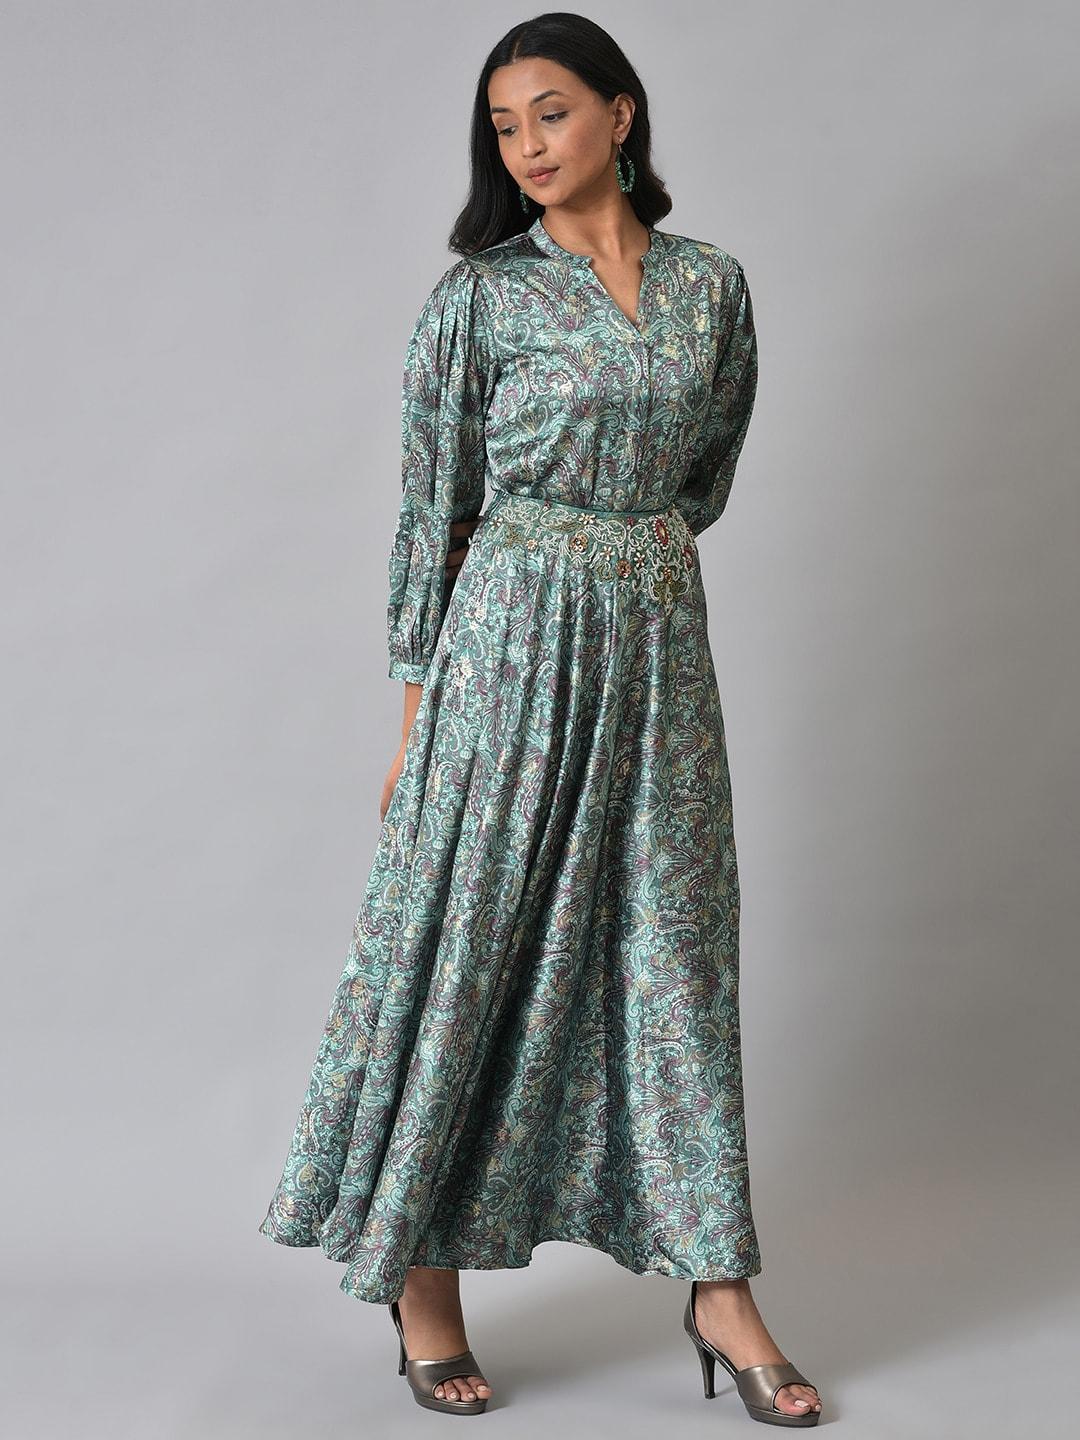 wishful women printed shirt with skirt co-ords set